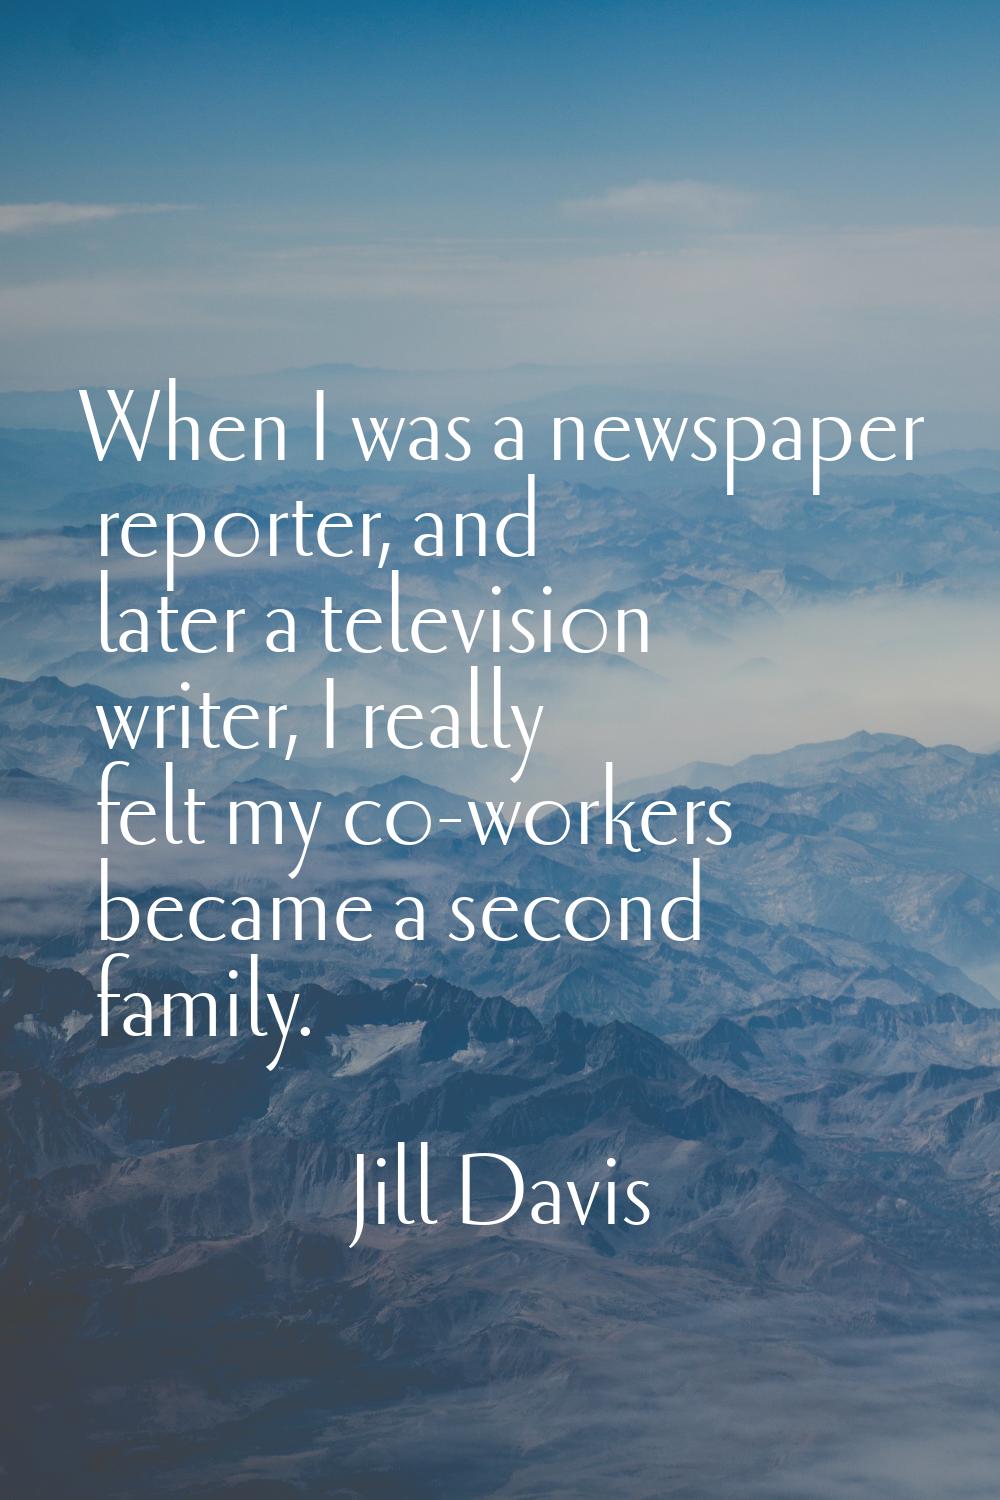 When I was a newspaper reporter, and later a television writer, I really felt my co-workers became 